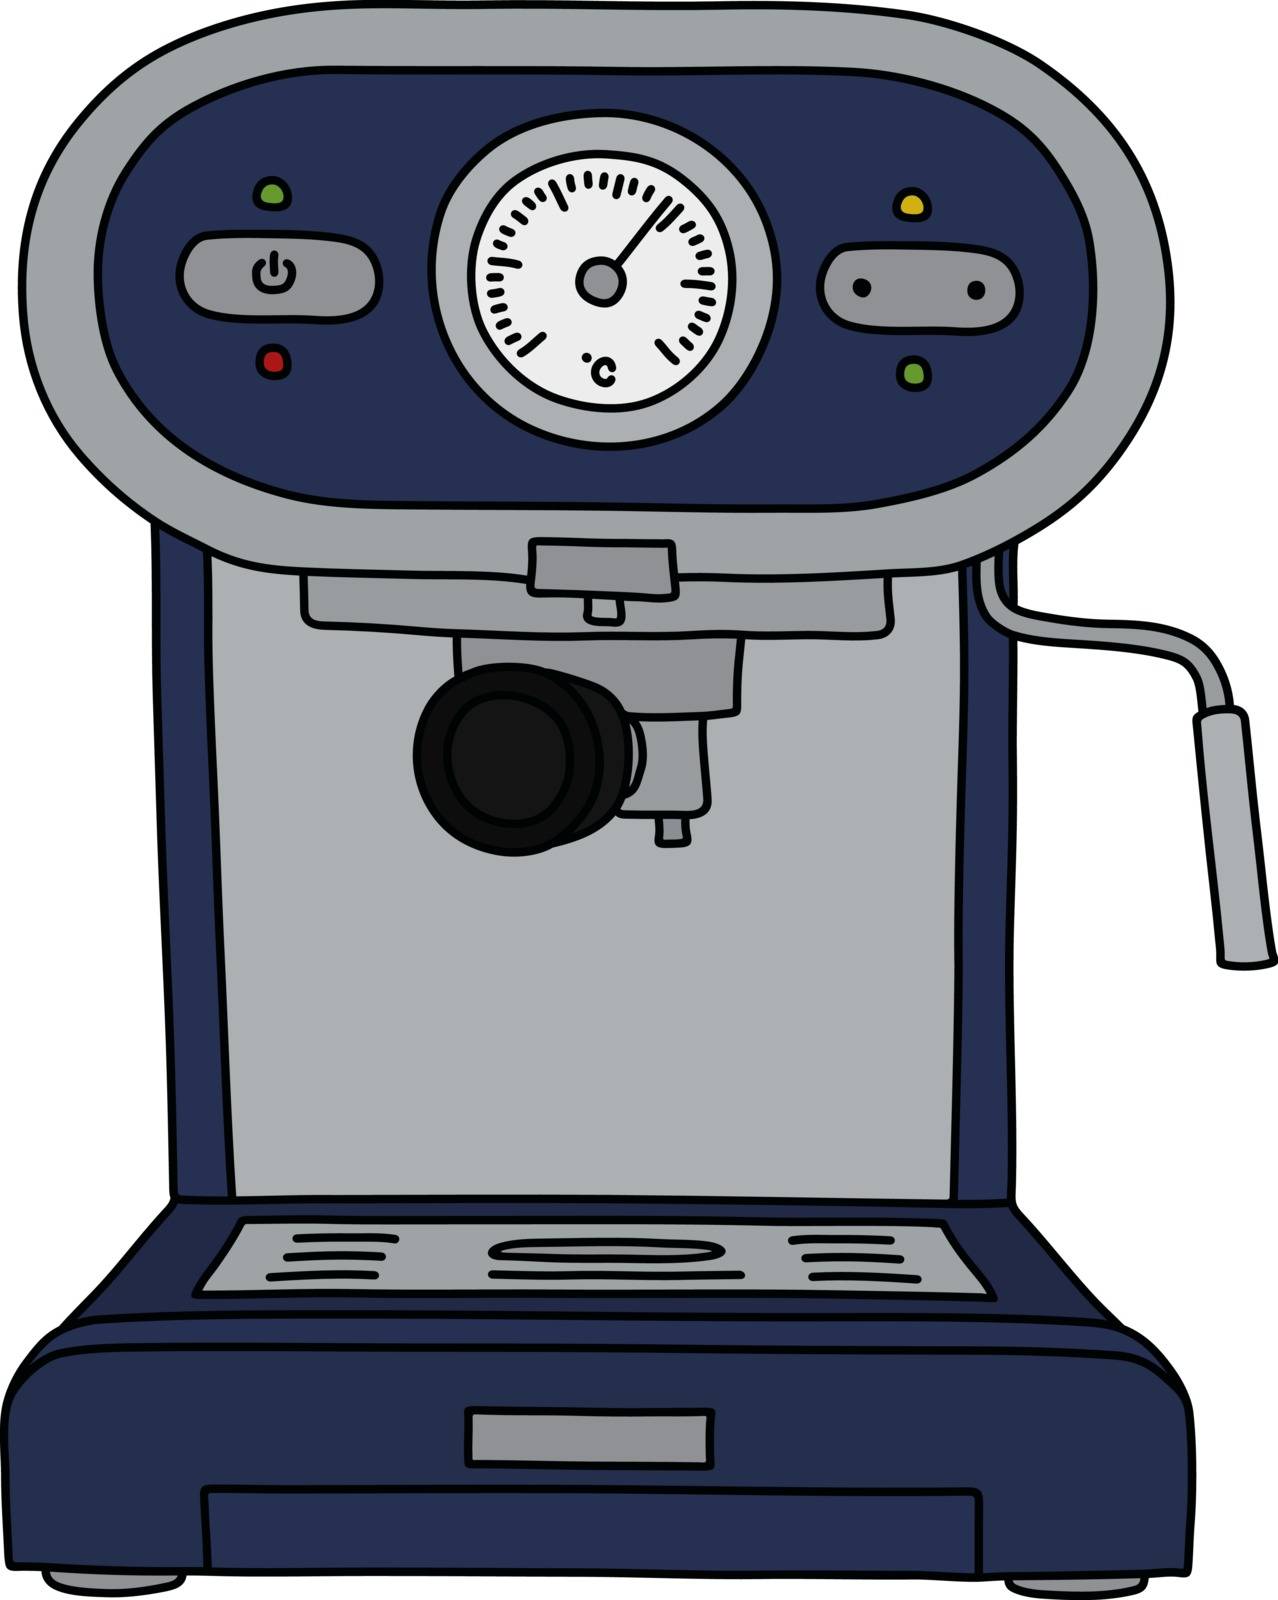 The vectorized hand drawing of a blue electric espresso maker